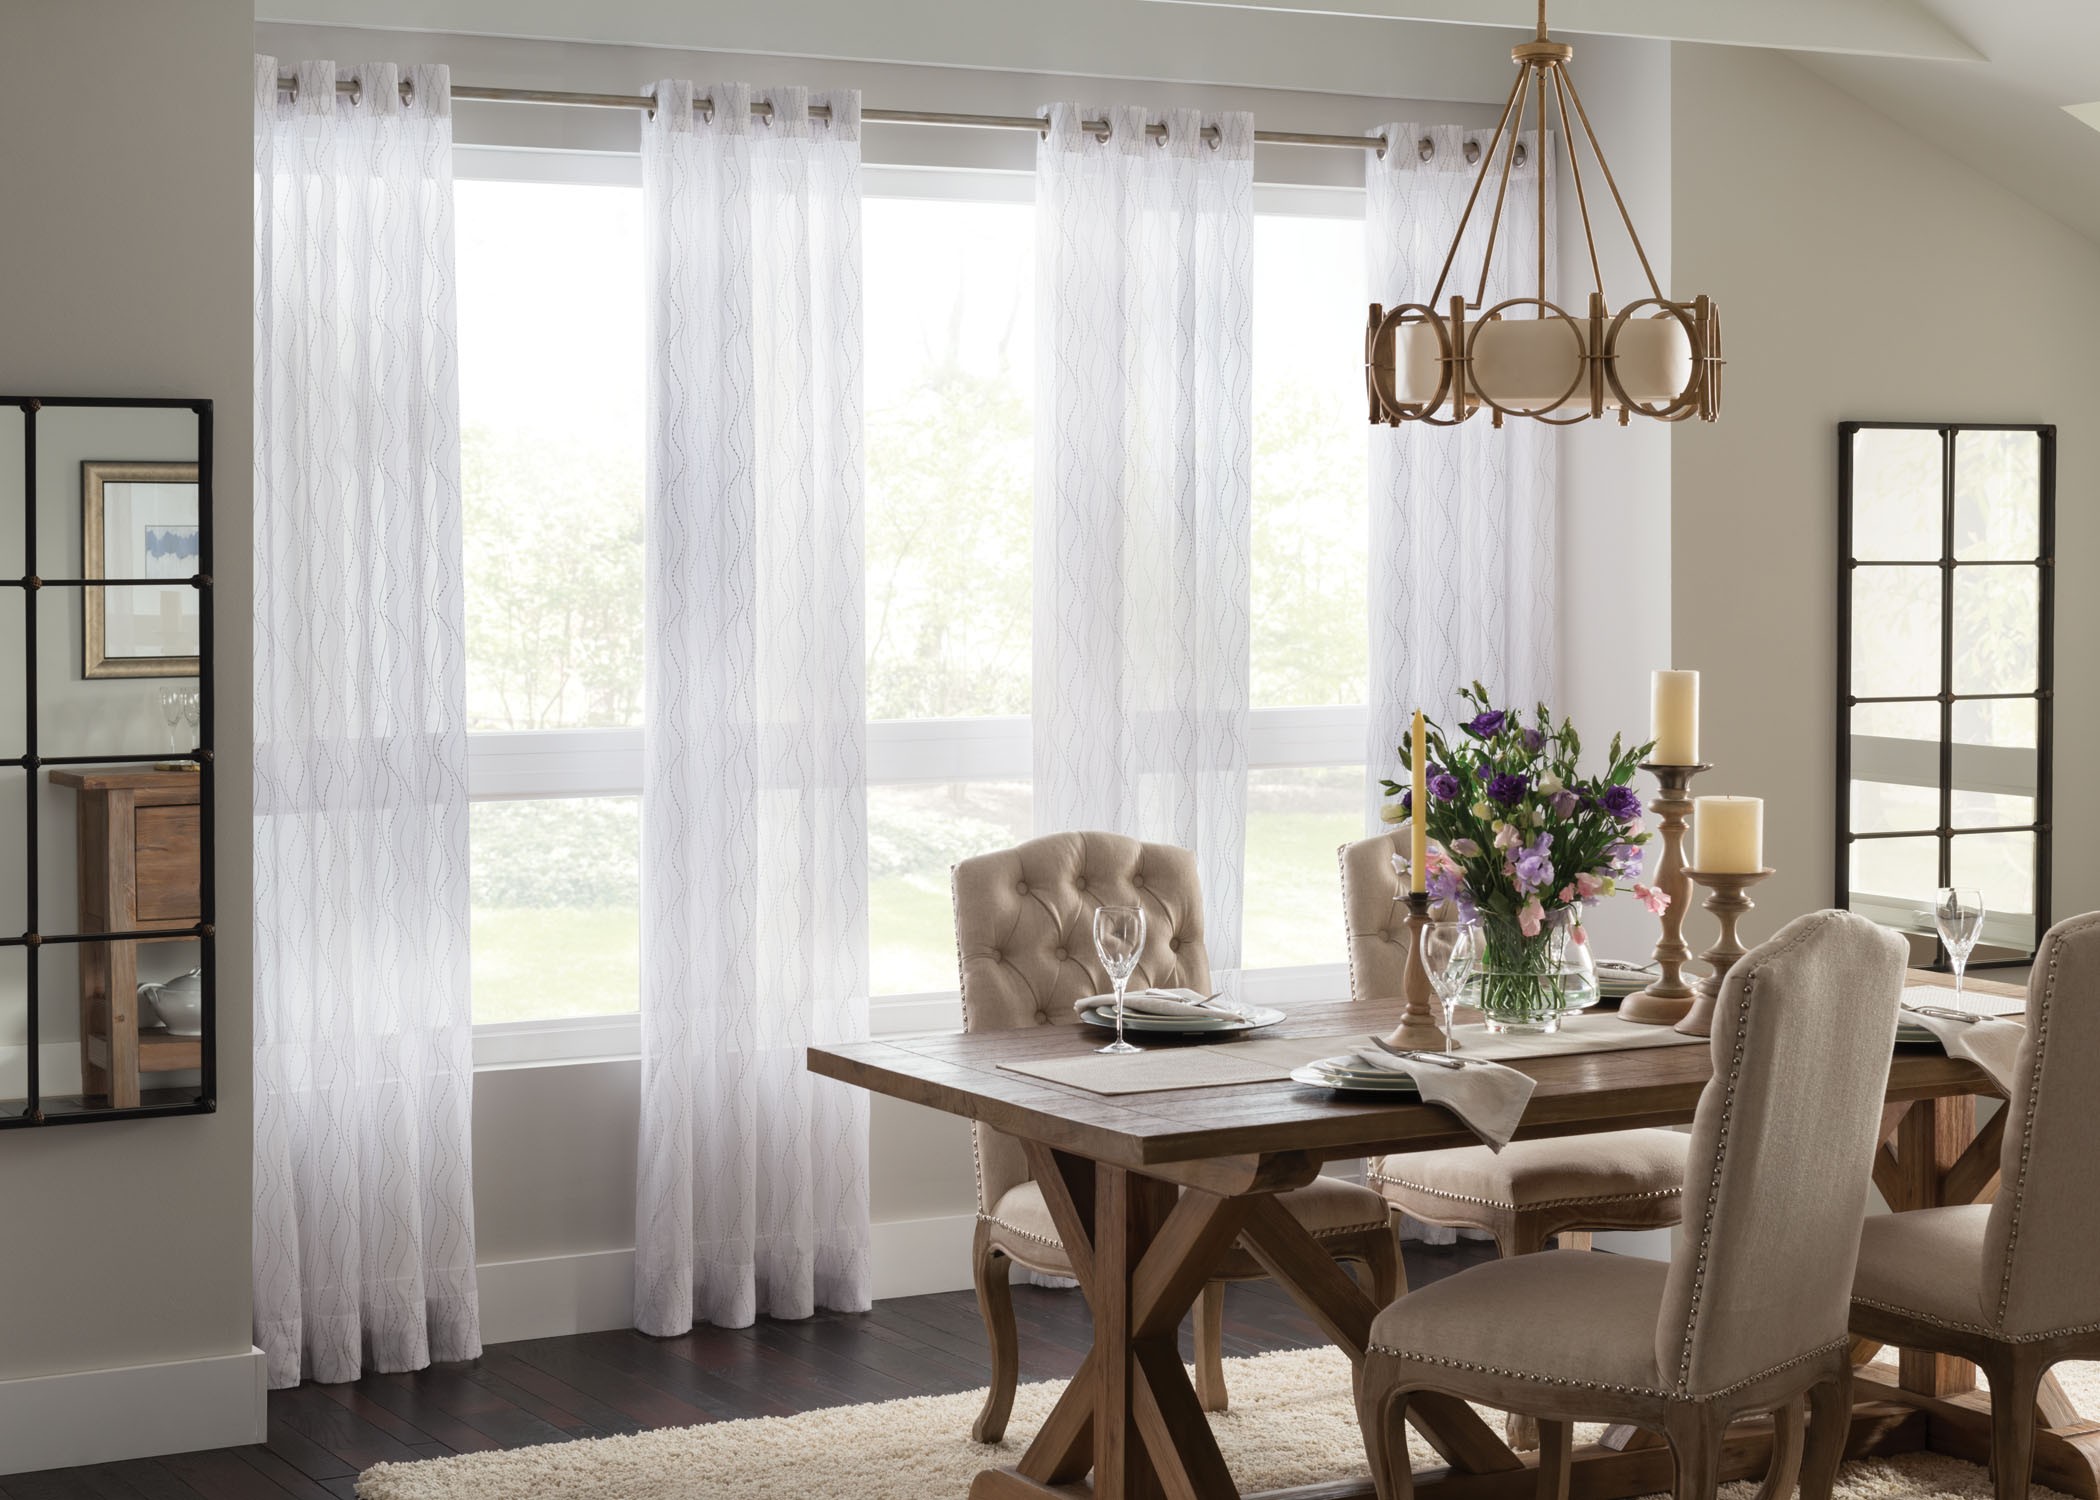 Window Curtains Ds Windecor, Dining Room Window Curtains